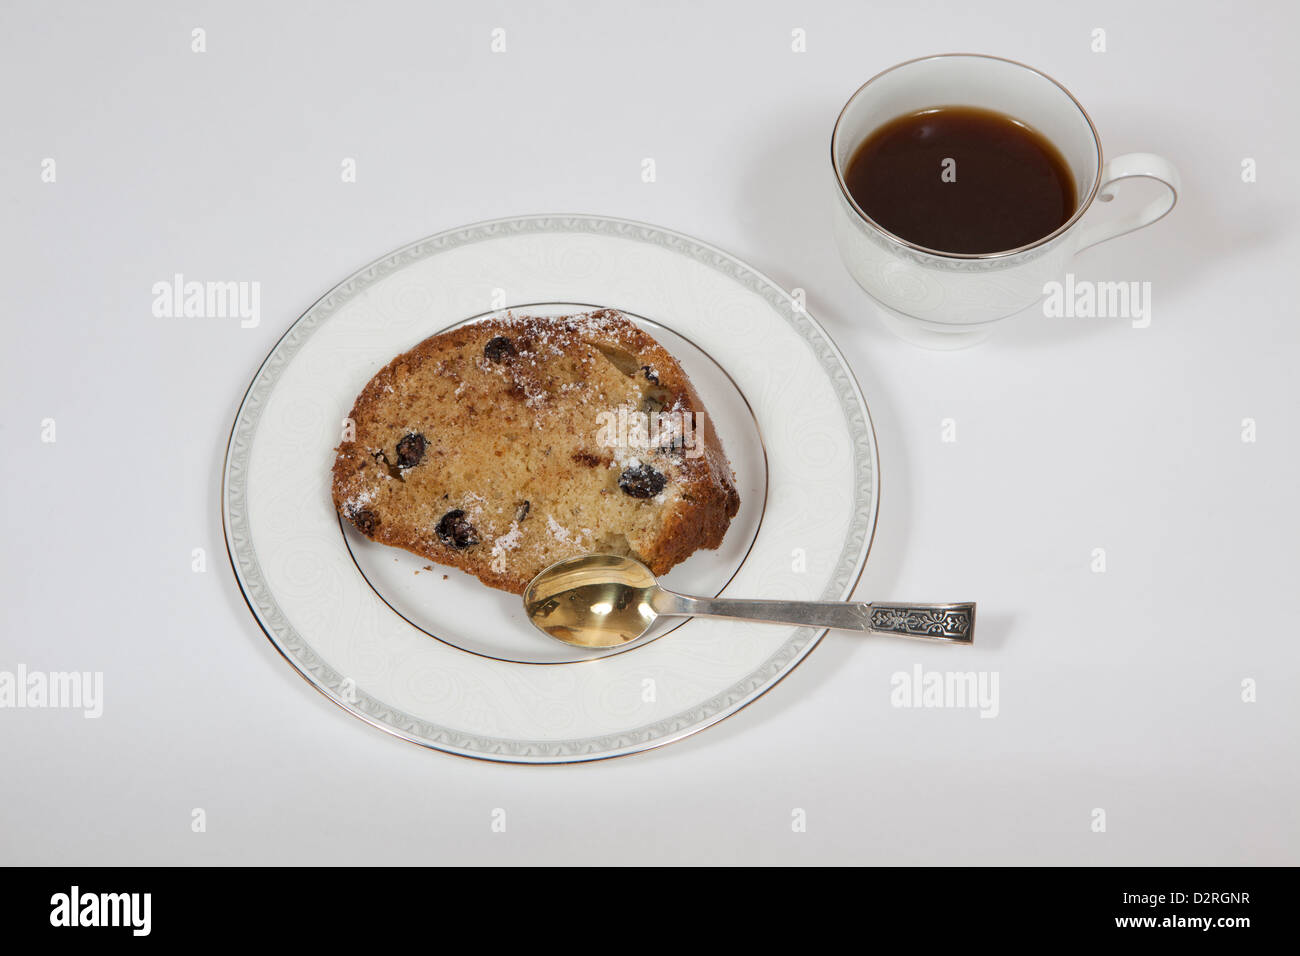 A piece of cake with a cup of coffee Stock Photo